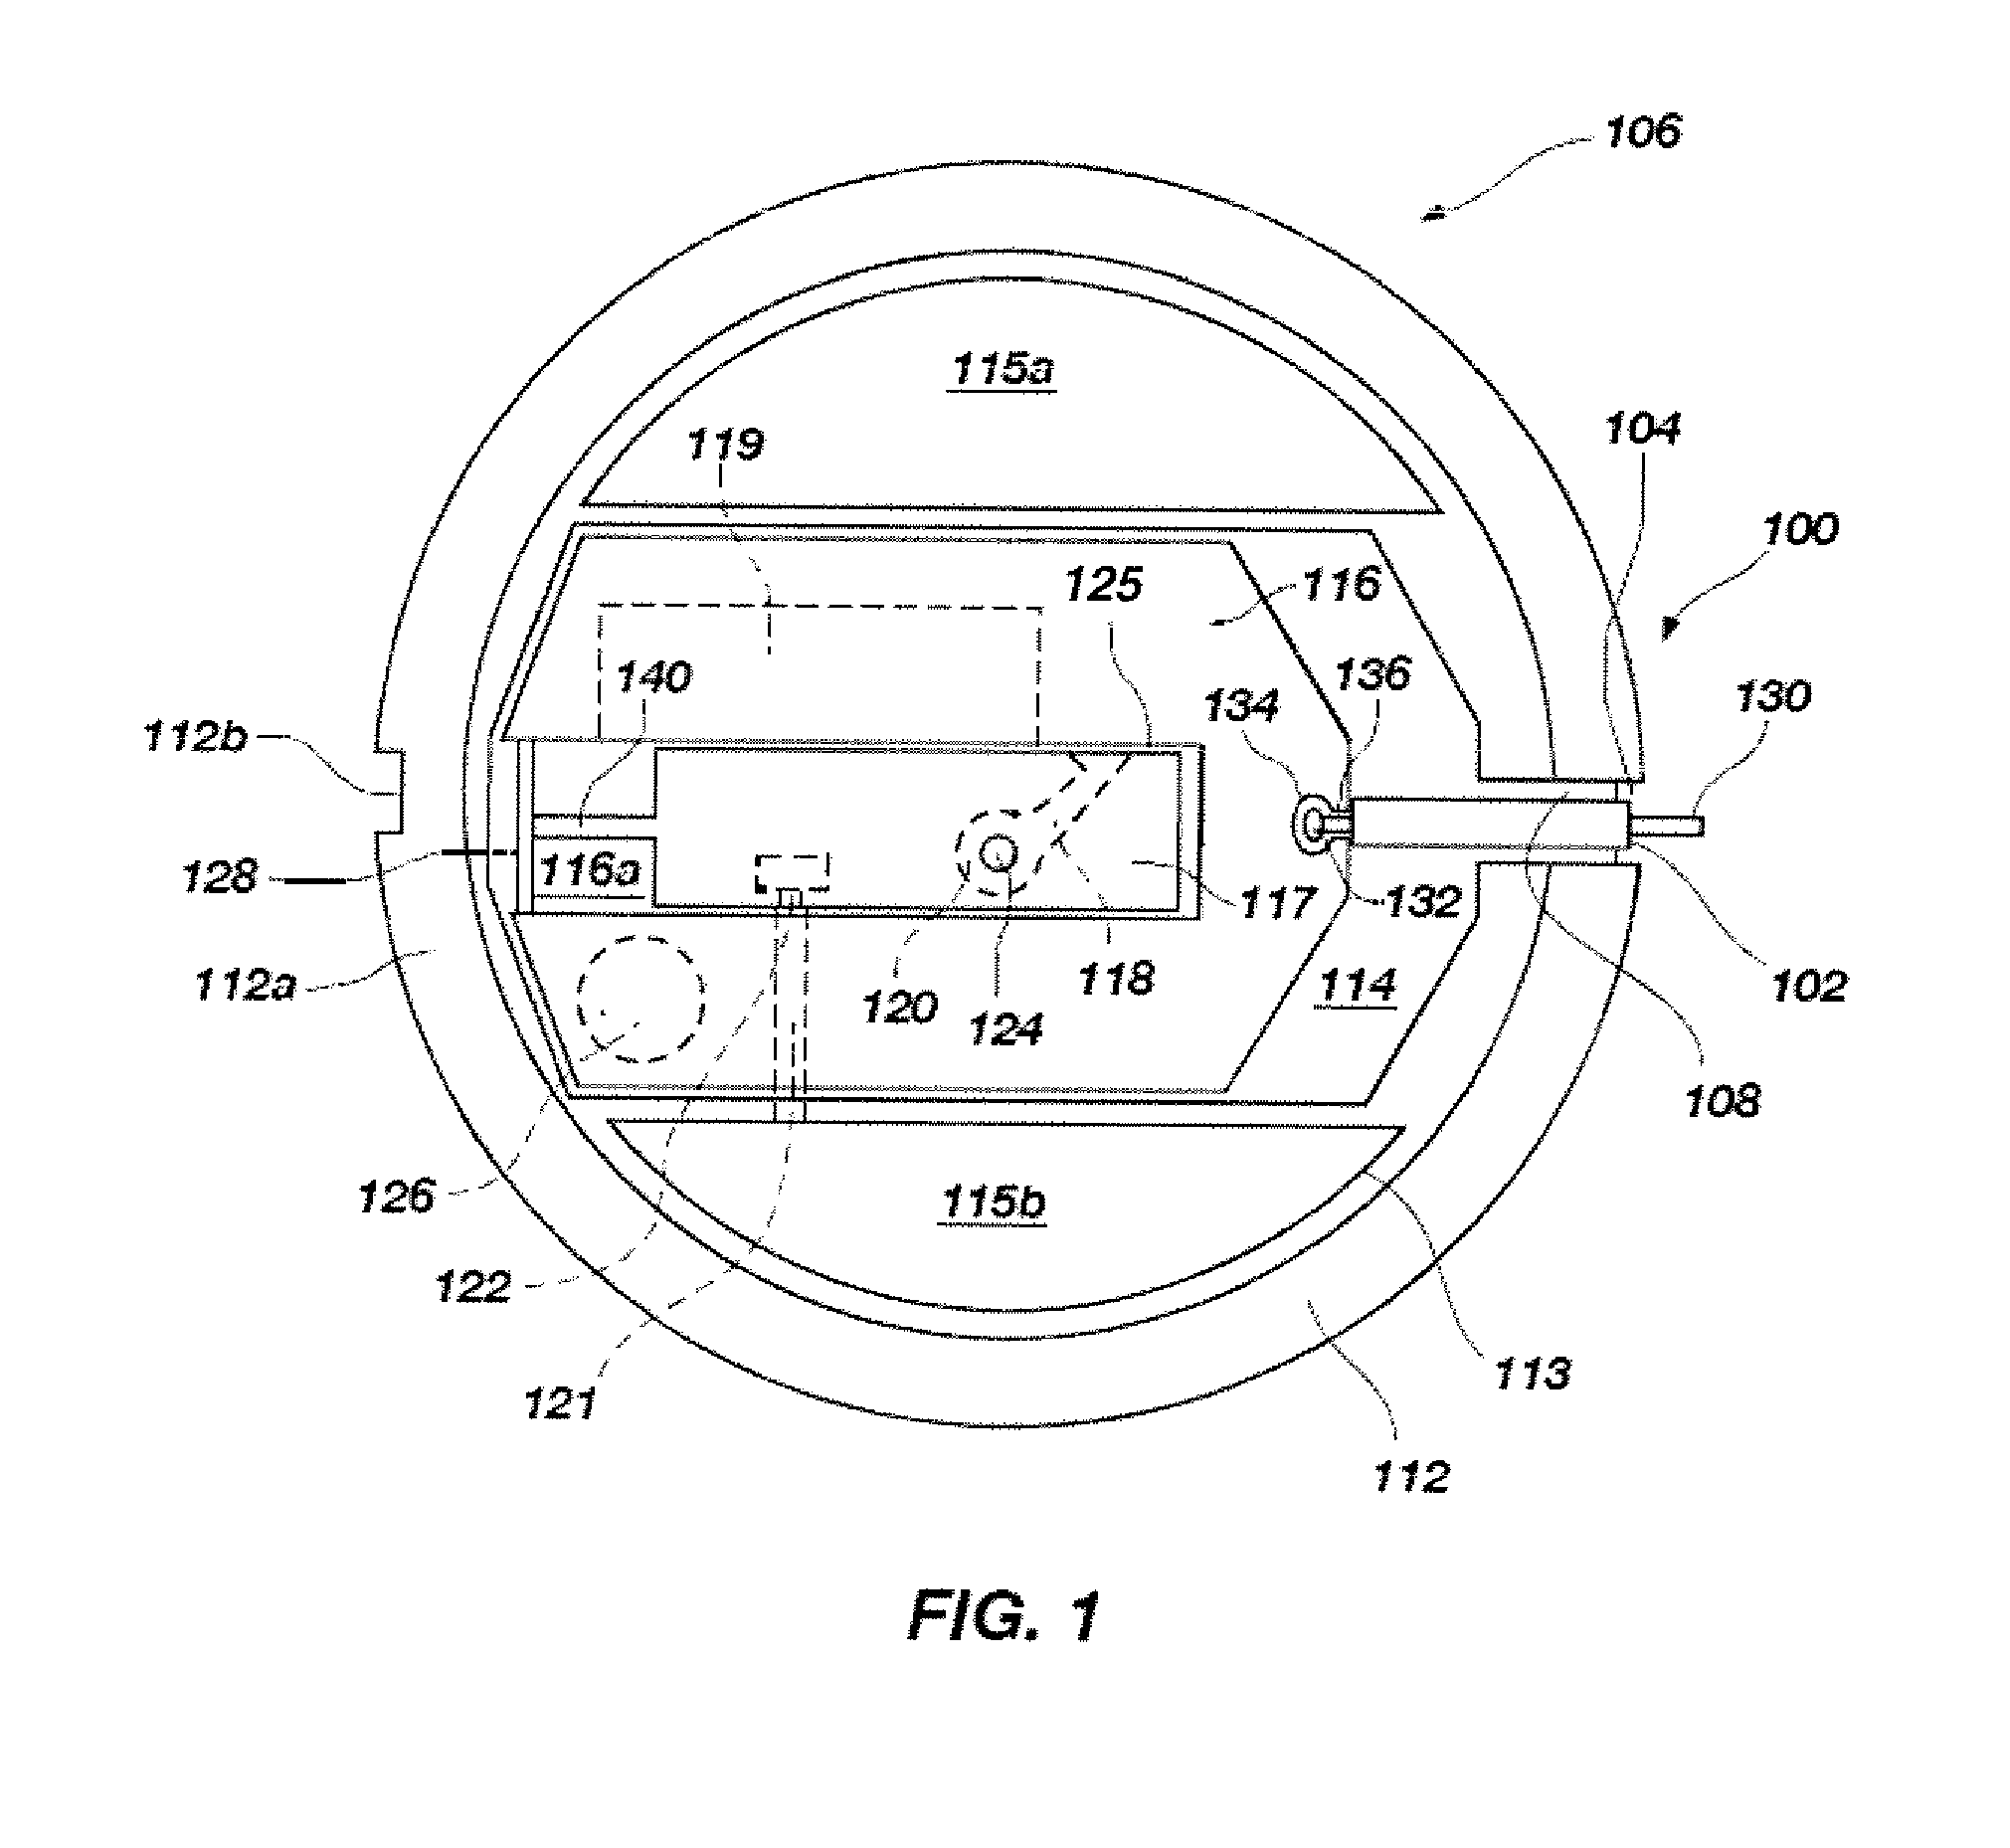 Igniter safe and arm, igniter assembly and flare so equipped and method of providing a safety for an igniter assembly